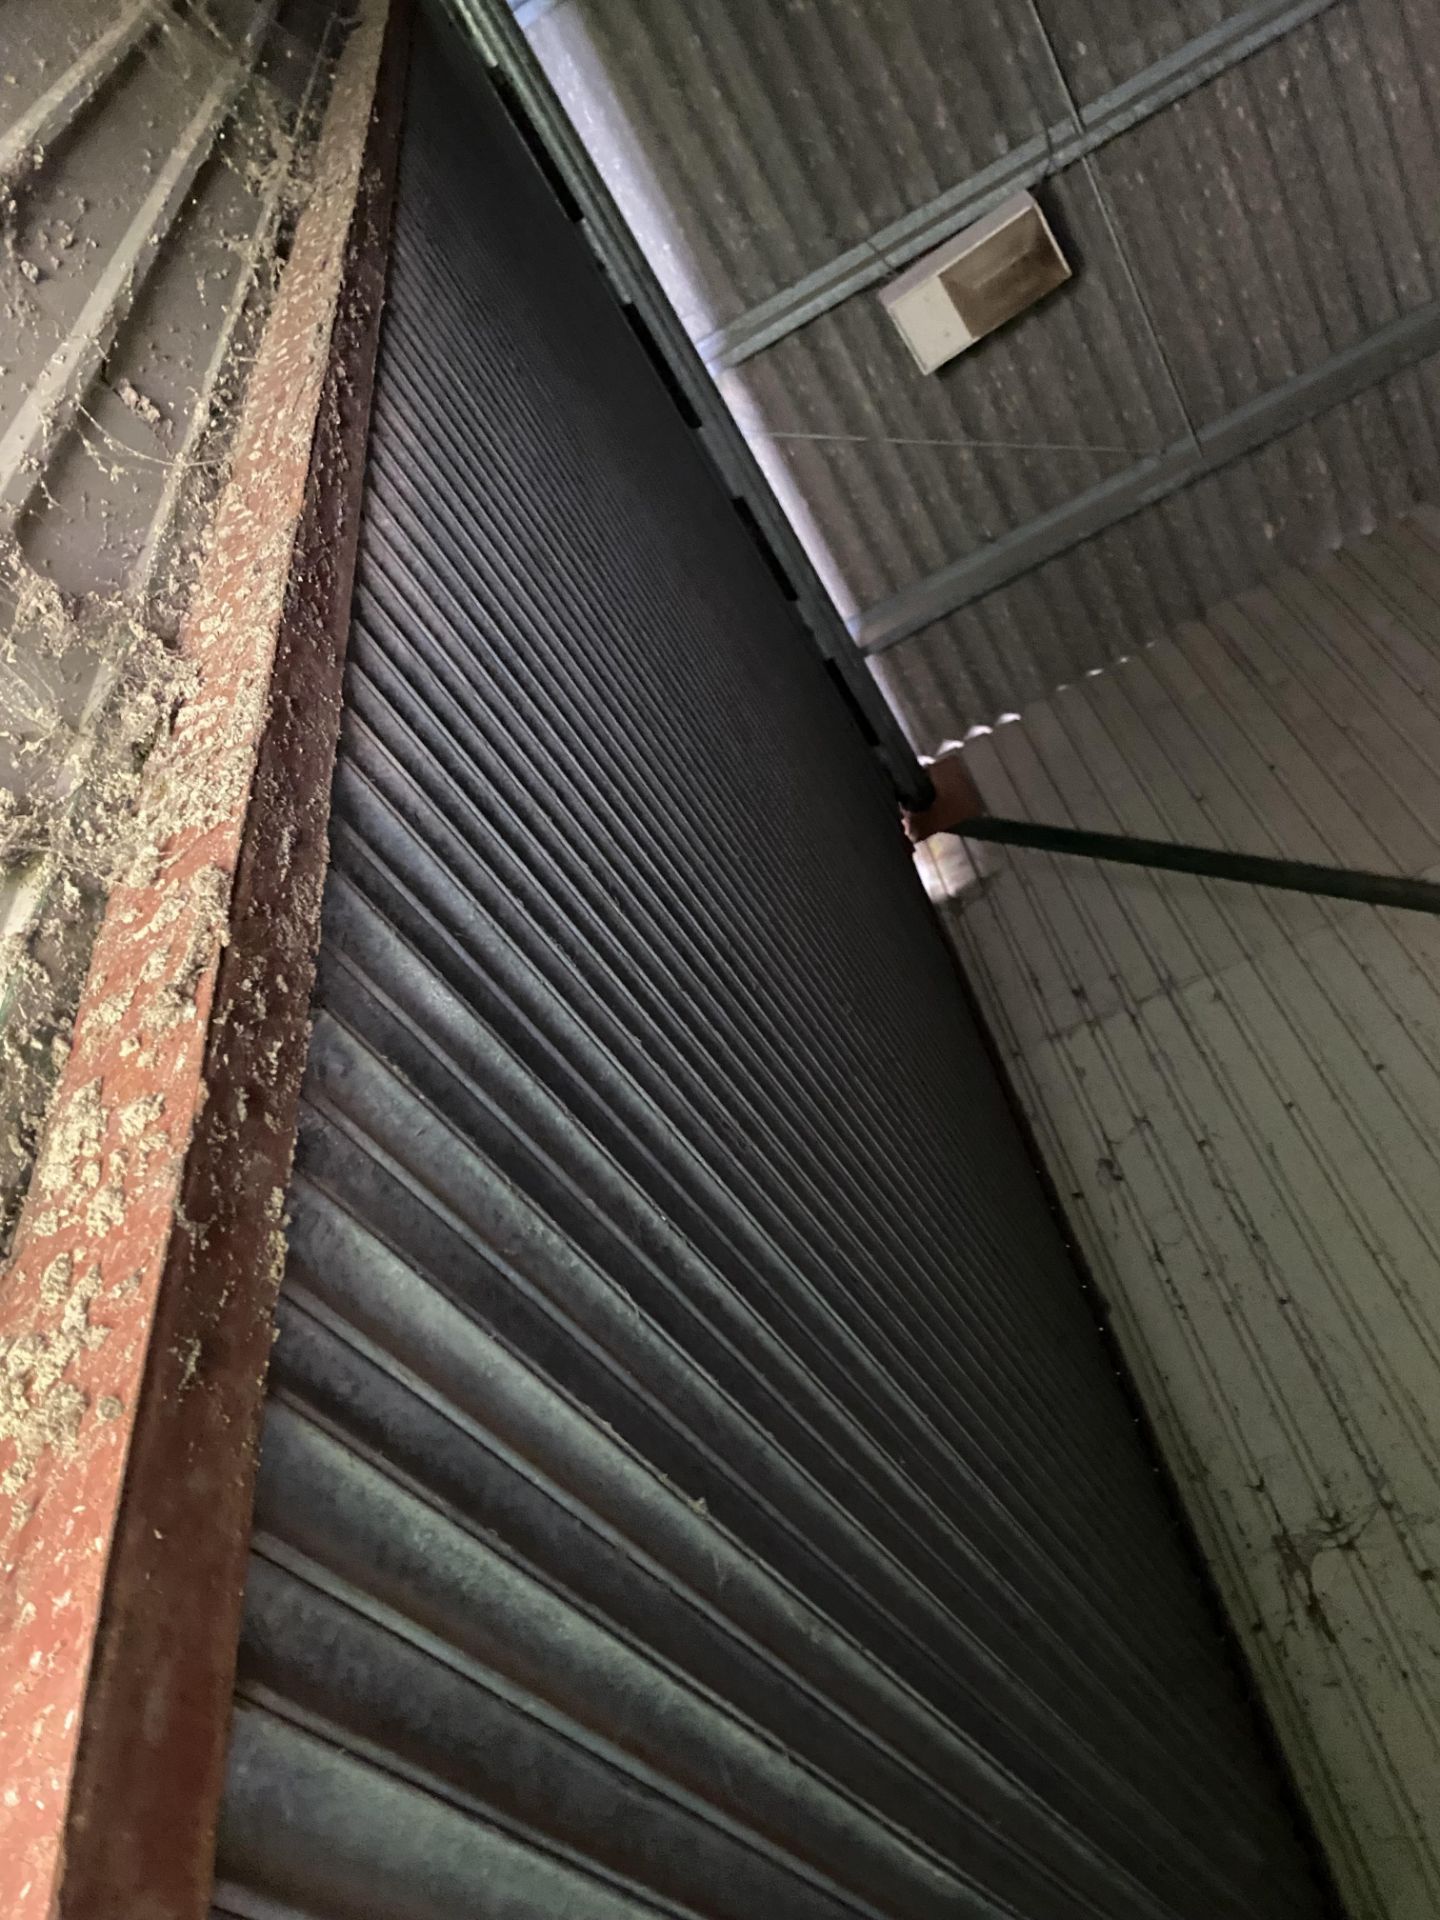 Galvanised Steel Electric Lift Roller Shutter Door, approx. 3.6m wide x 6.8m high, purchaser - Image 3 of 3